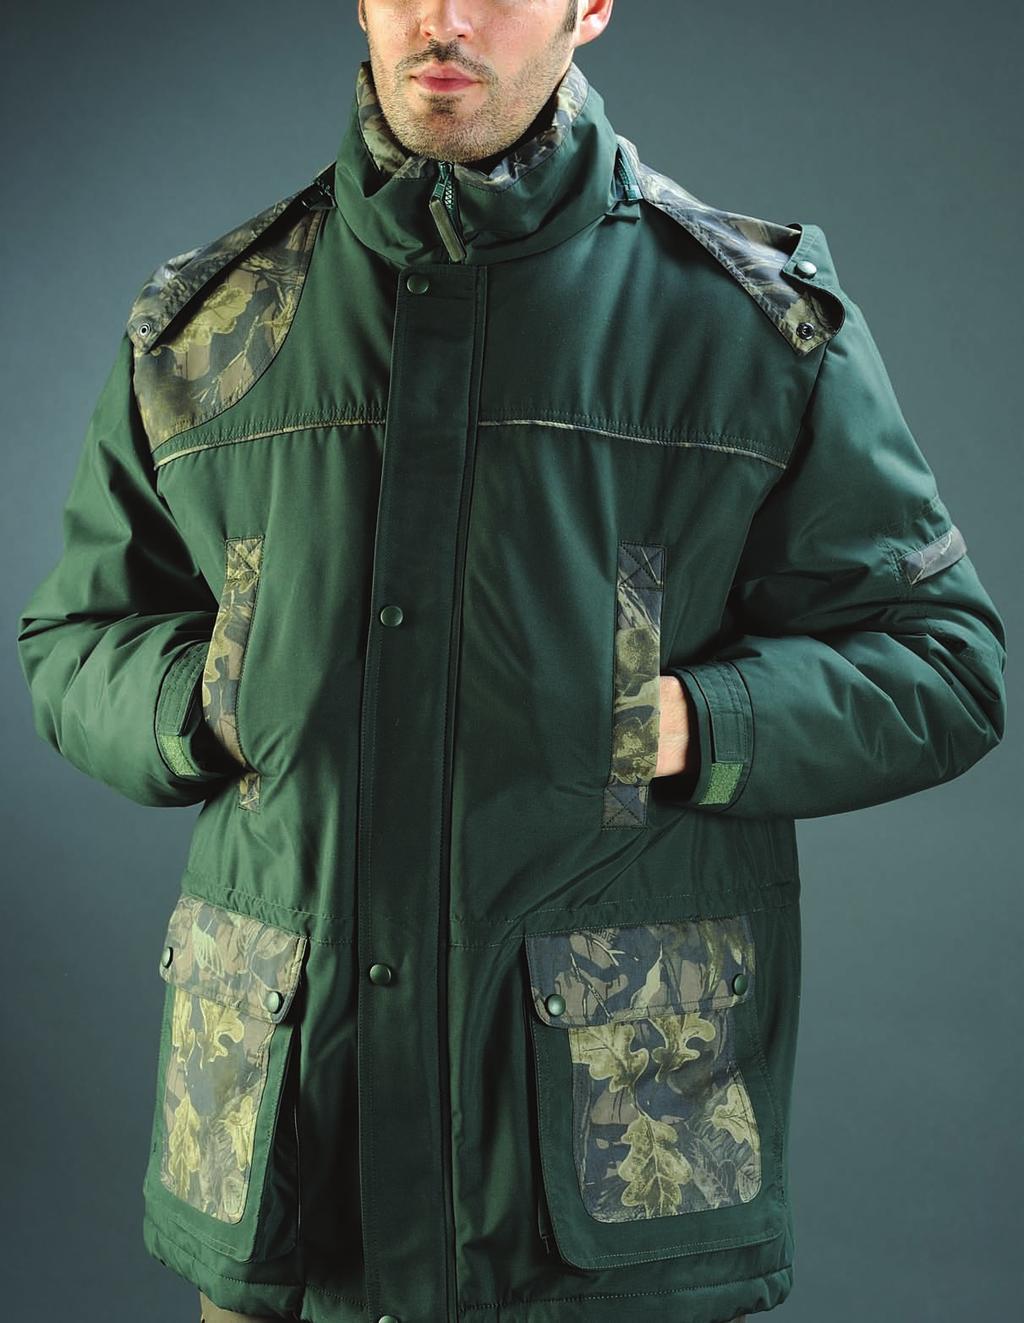 HUNTING WINTER JACKET CODE 10-1251 Hand warmer chest pocket High volume functional pockets with flaps